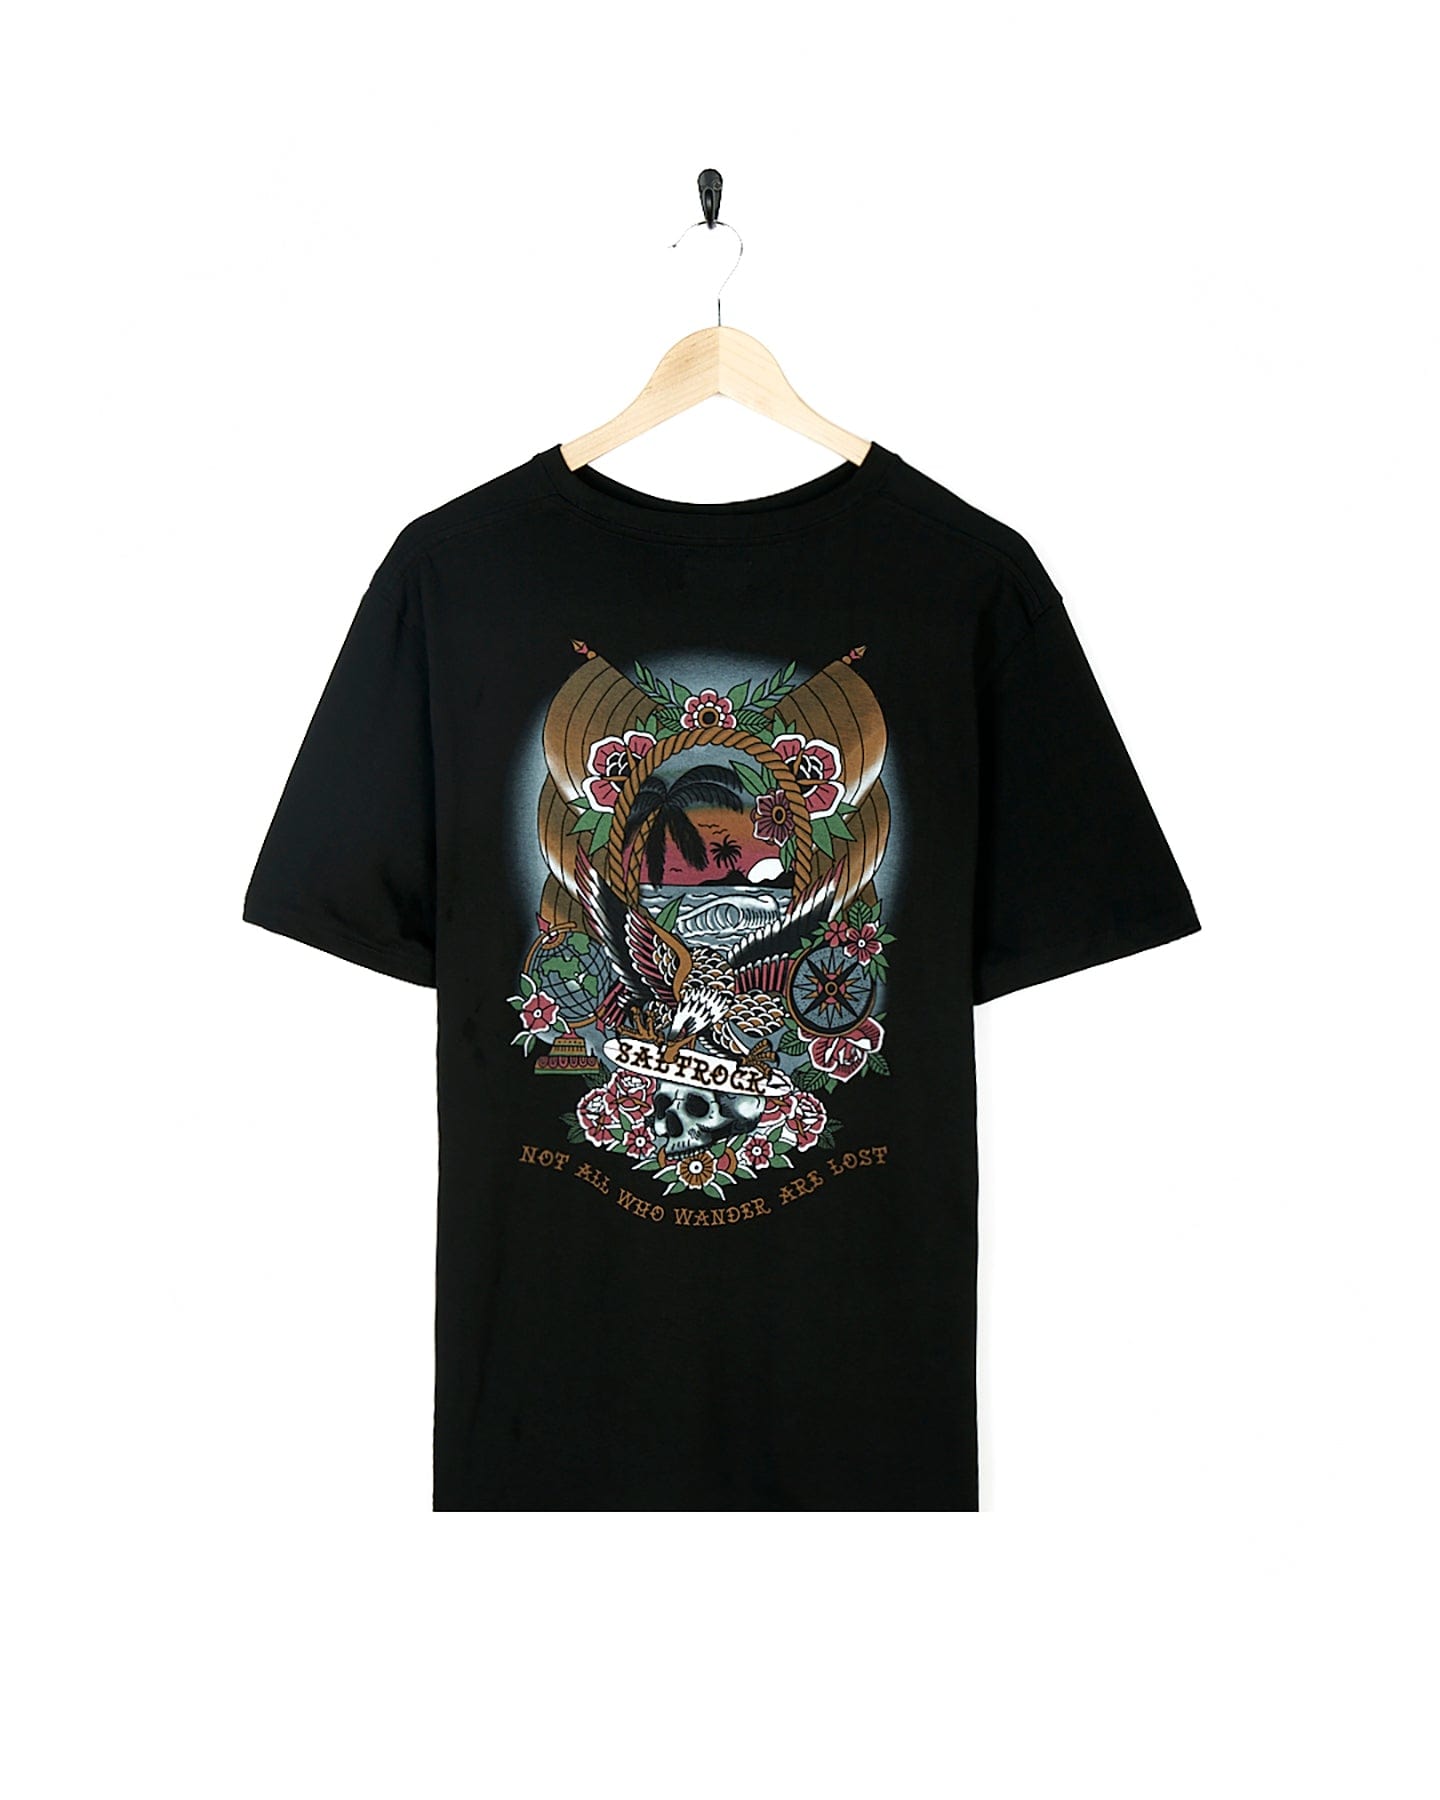 A Tattoo Island 2 - Mens Short Sleeve T-Shirt - Black by Saltrock with an image of a dragon on it.